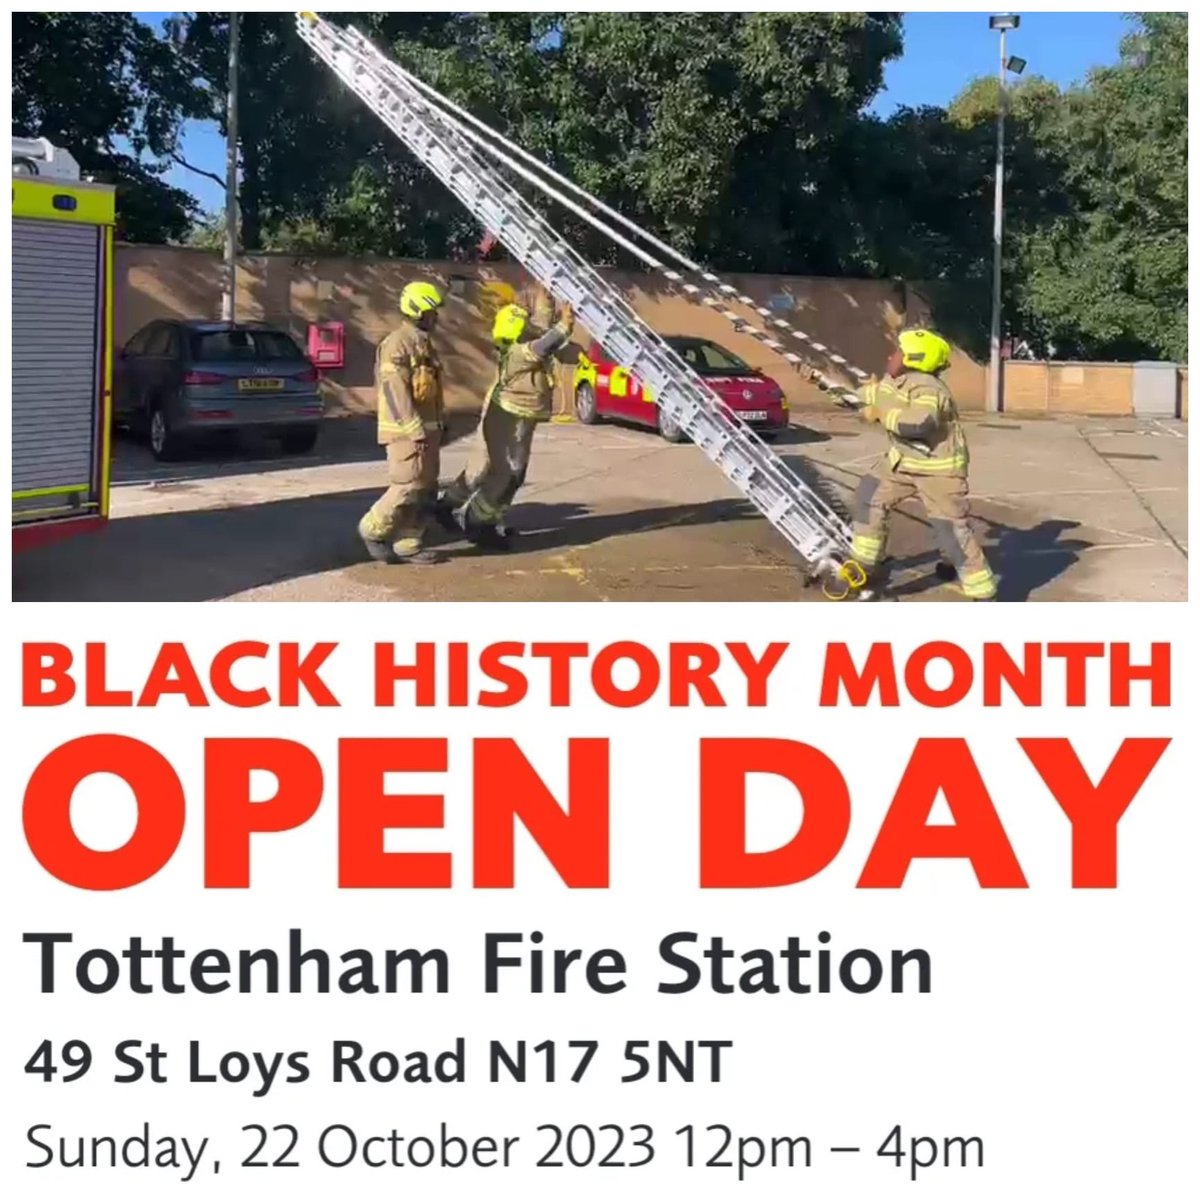 It's drill time! A Crew of Women. One 13.5m ladder. Weighing 100 kilos. 1 jet and 2 hose reels. Get to work! 

Come and see us in action on Sunday 22nd October. 12pm to 4pm (our demo starts at 2pm).

#londonfirebrigade #lfb #london #blackhistorymonth  #BHM23